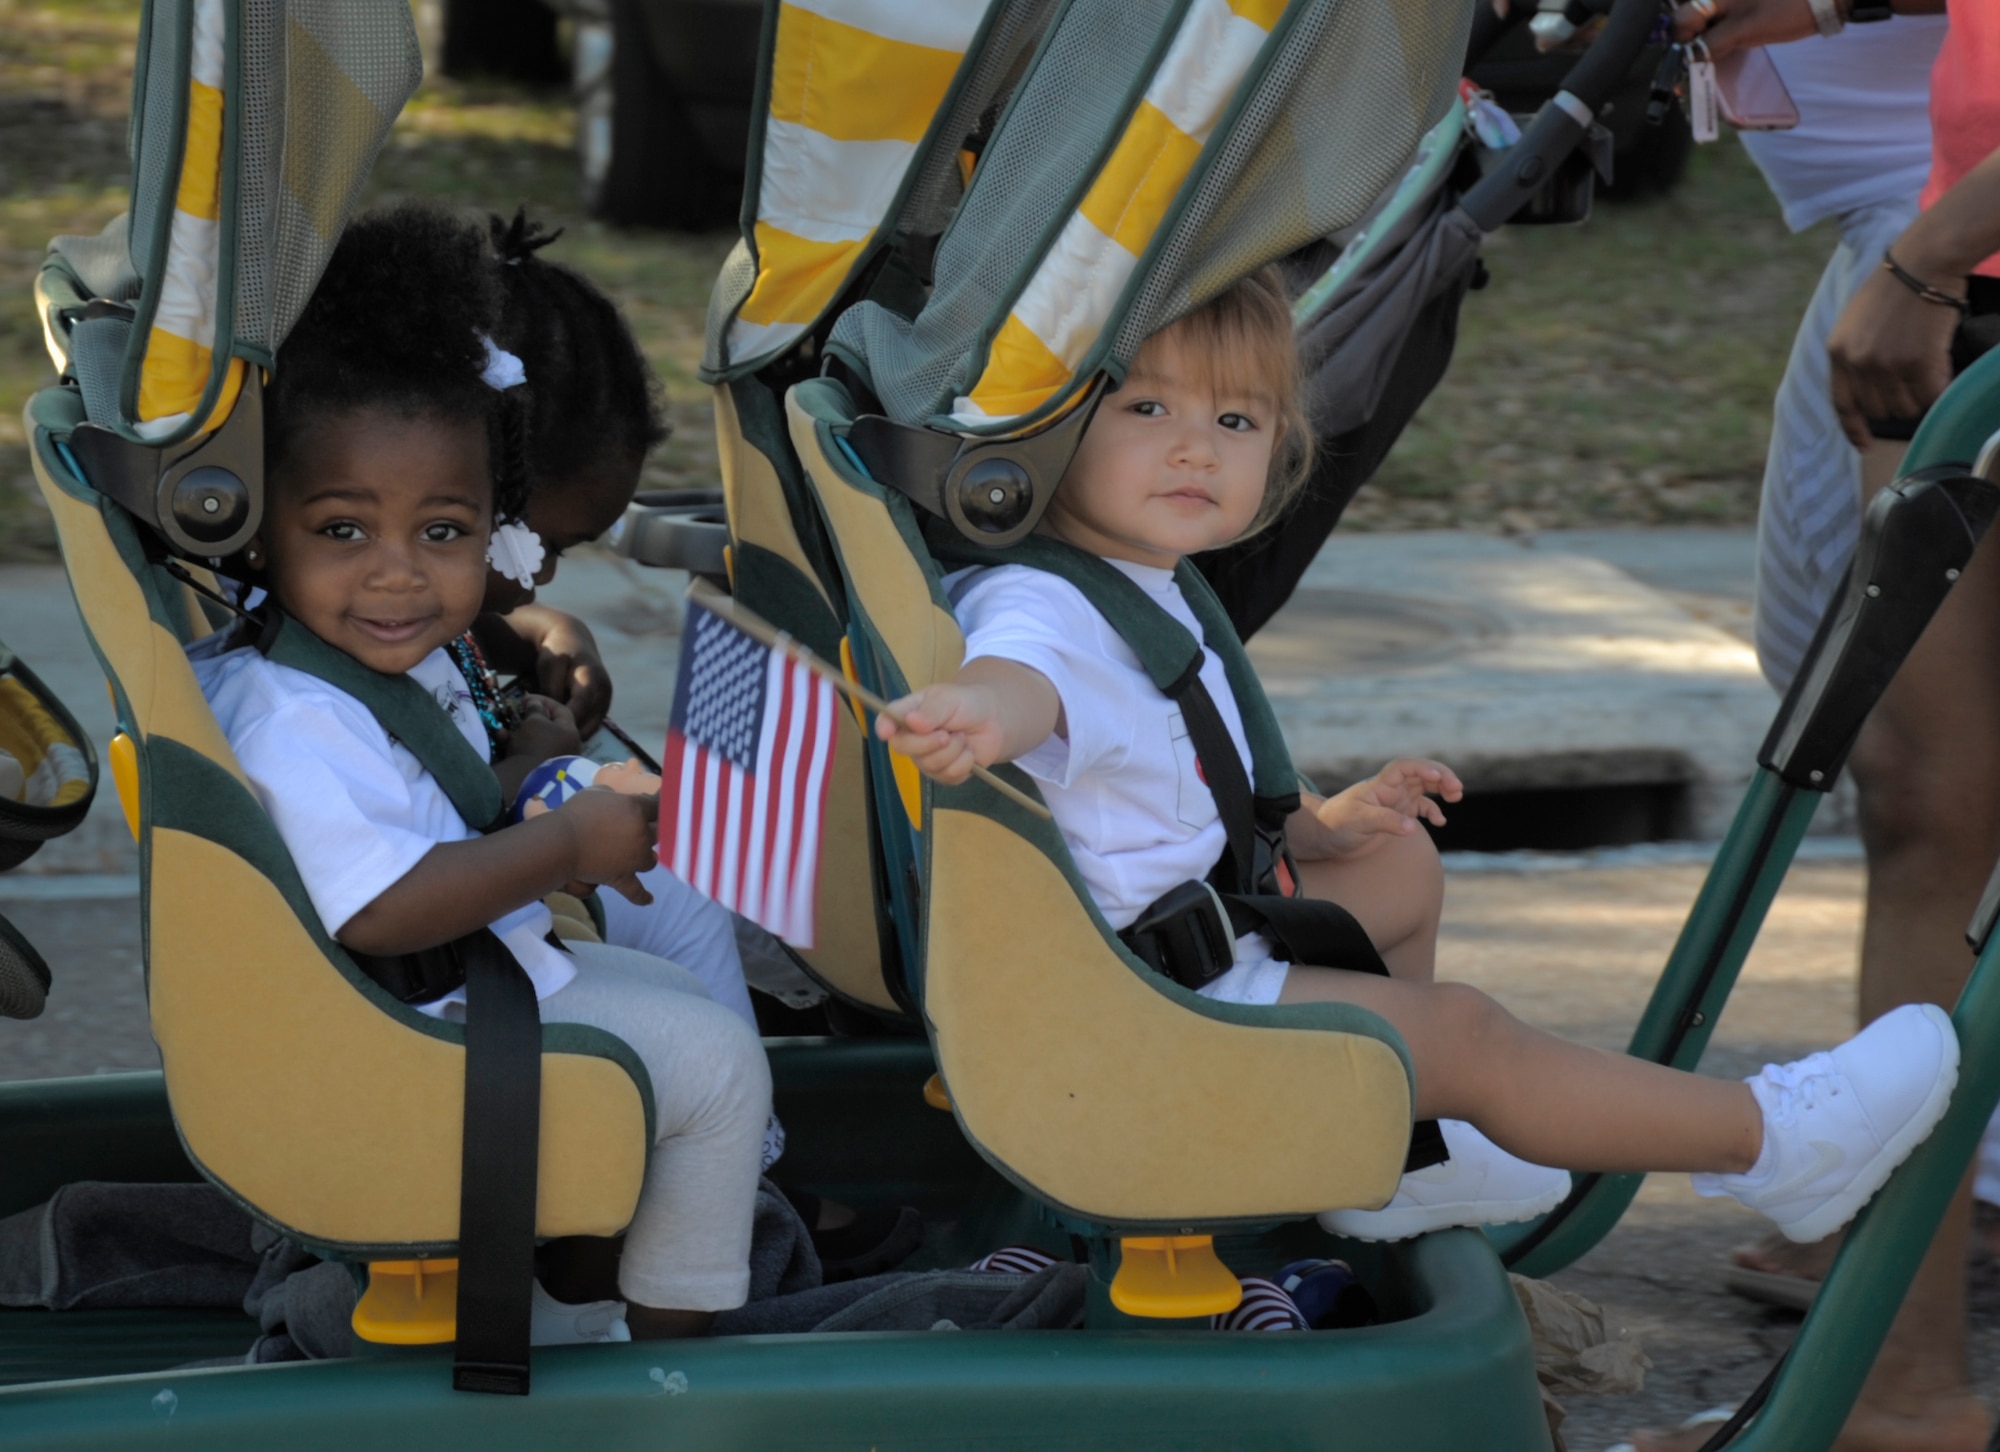 Children from the MacDill Child Development Center participate in the Month of the Military Child parade at MacDill Air Force Base, Fla., April 21, 2017. Month of the Military Child is a month of celebration for children of service members. (U.S. Air Force photo by Airman 1st Class Mariette Adams)